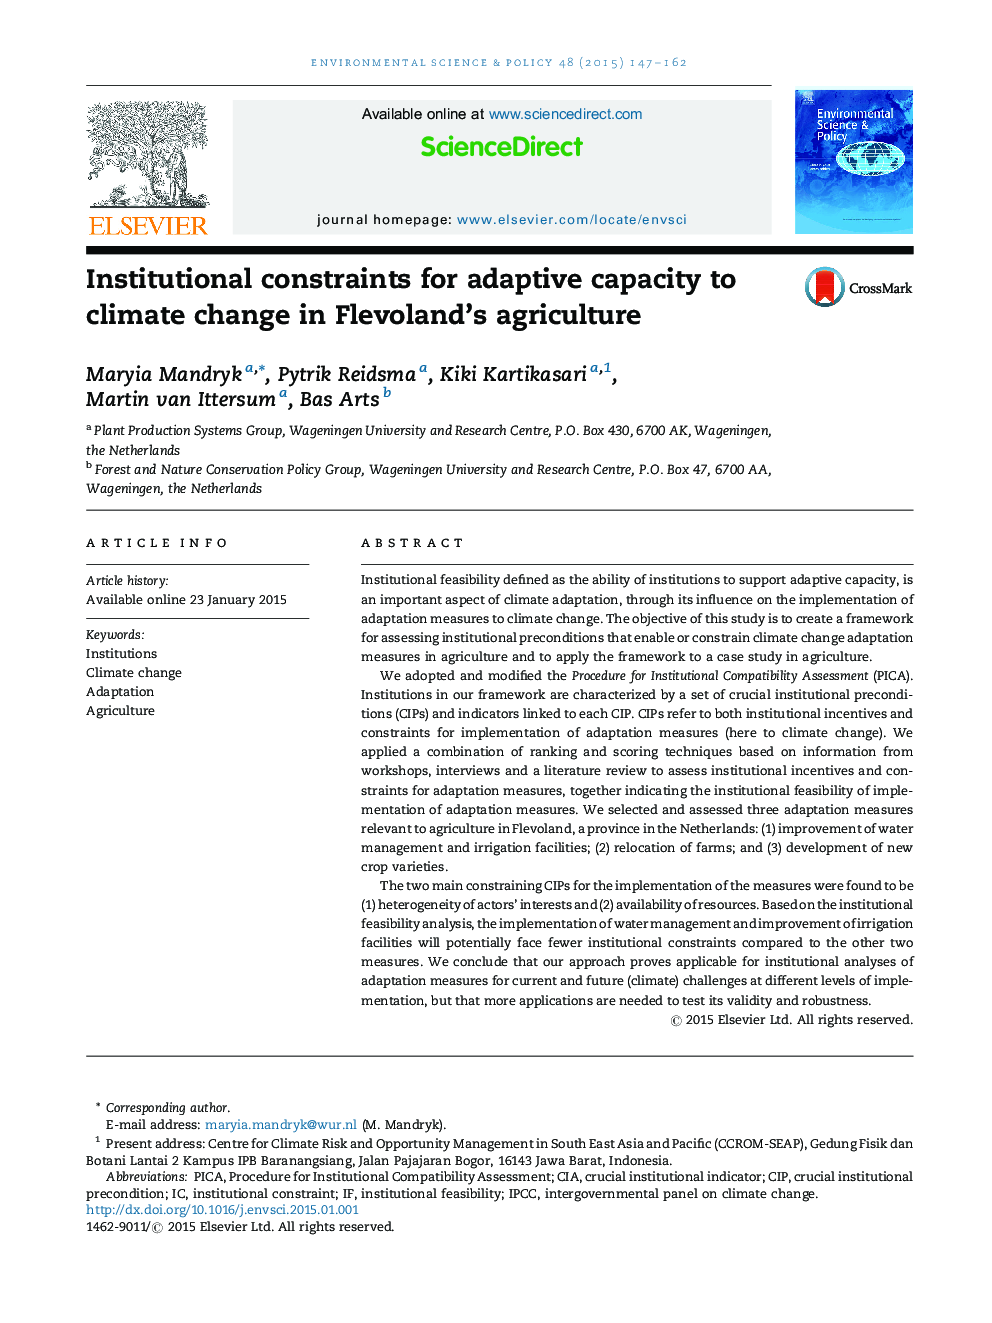 Institutional constraints for adaptive capacity to climate change in Flevoland's agriculture